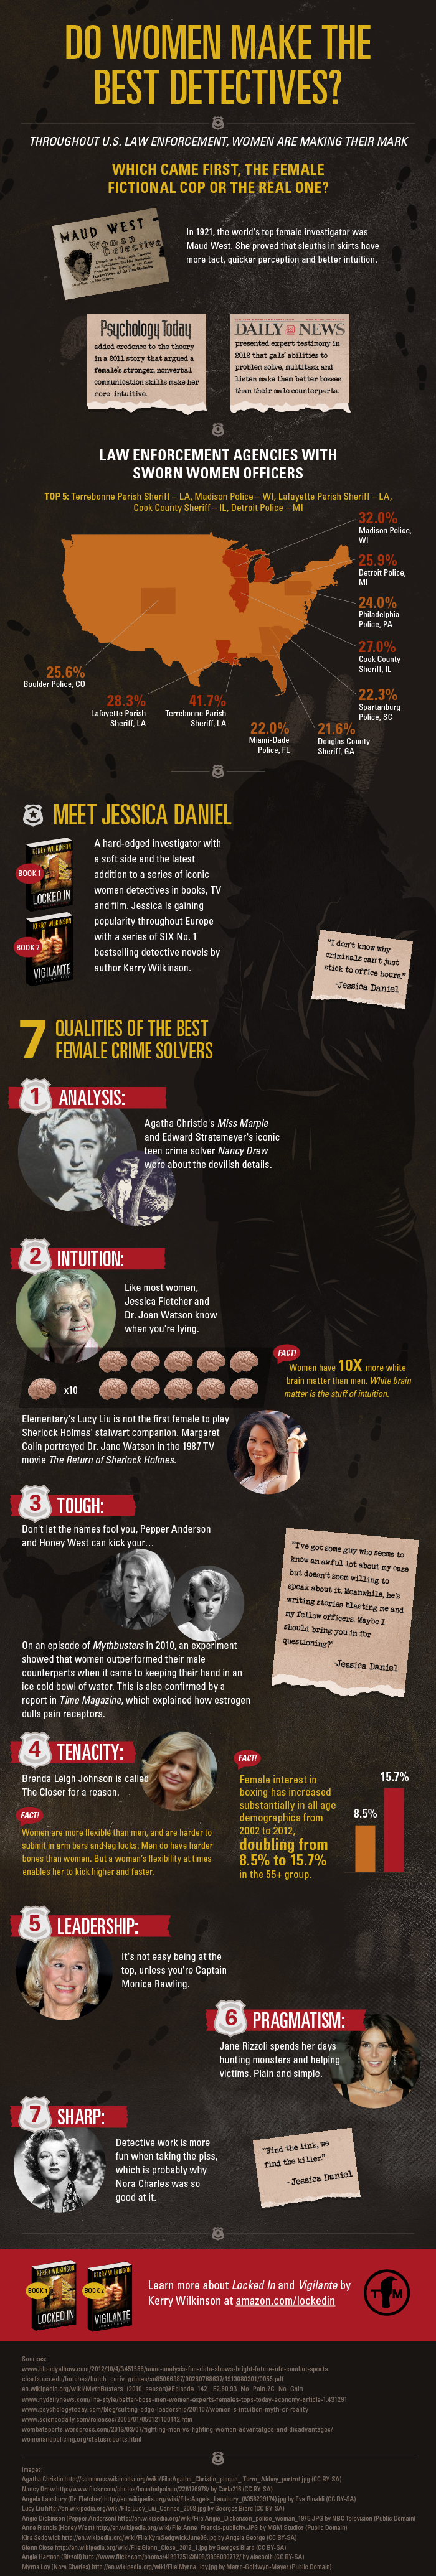 Do women make the best detectives? | Visual.ly